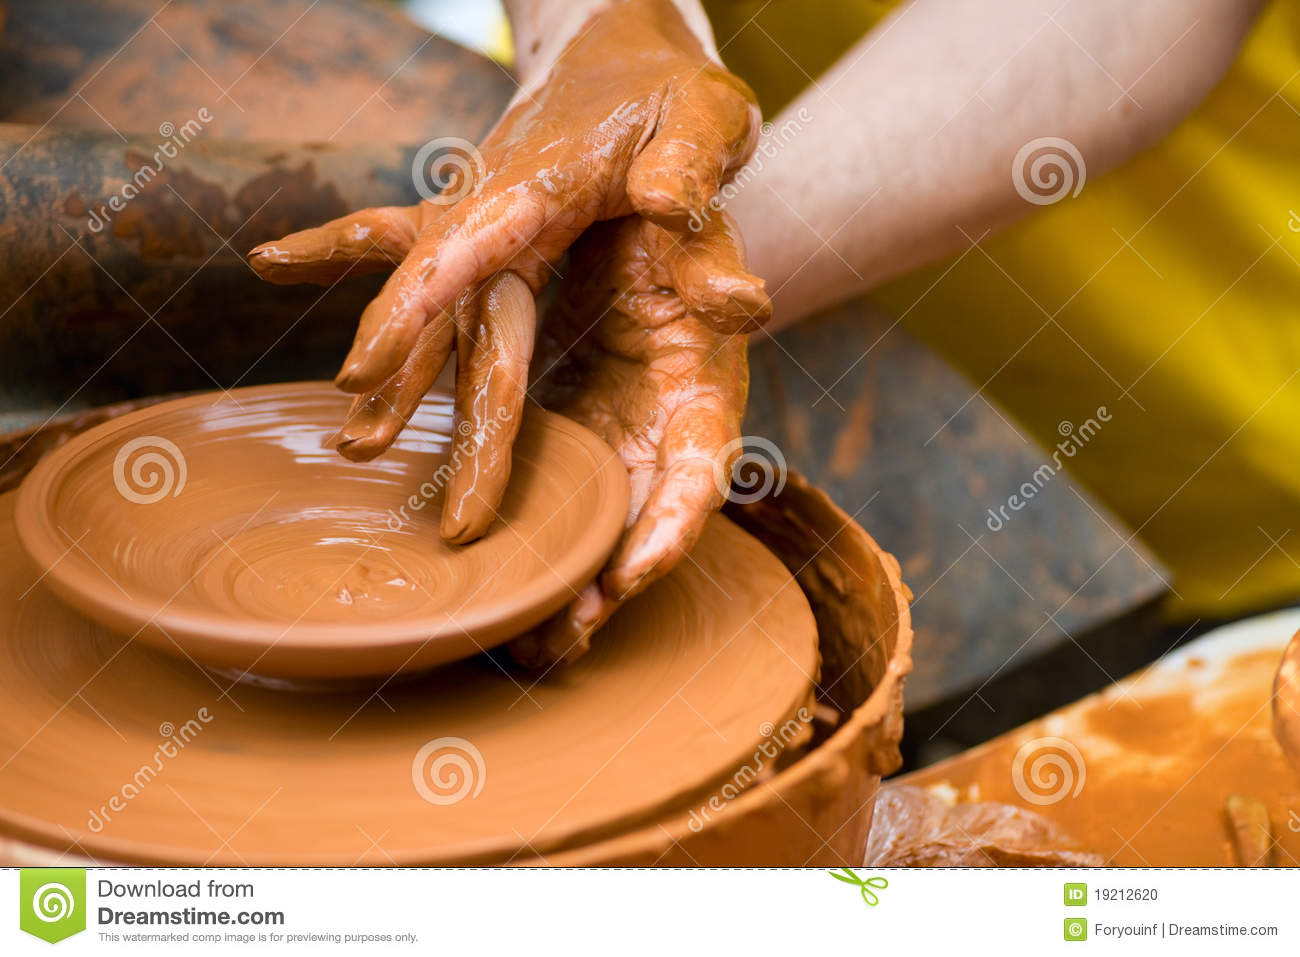 Potter Shaping A Ceramic Plate On A Pottery Wheel